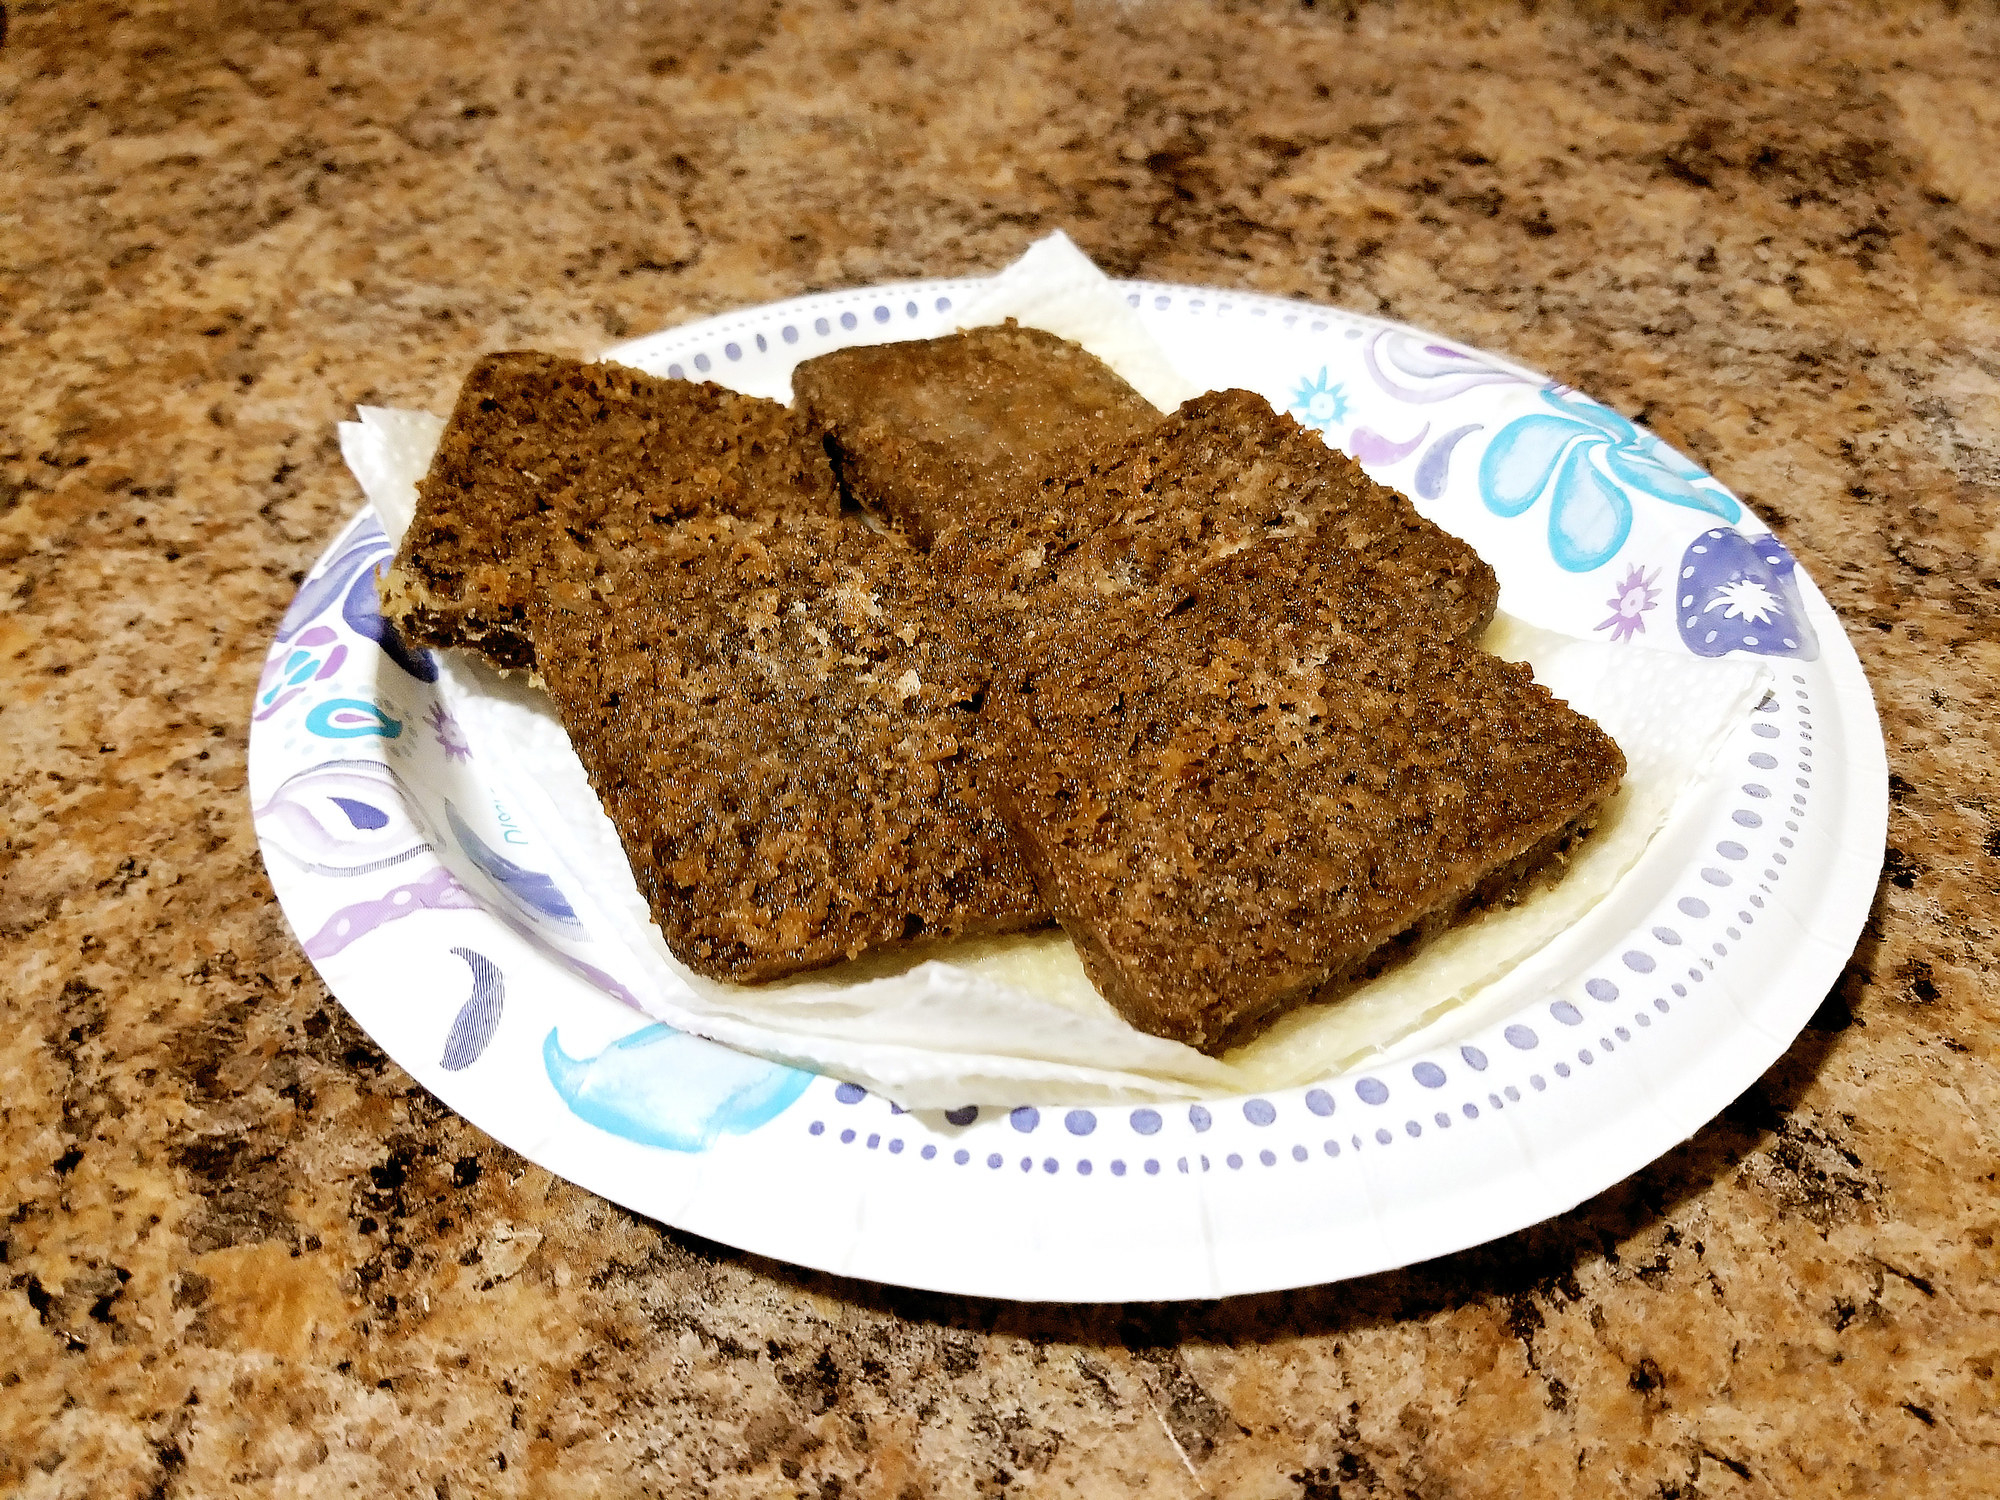 Scrapple on a plate